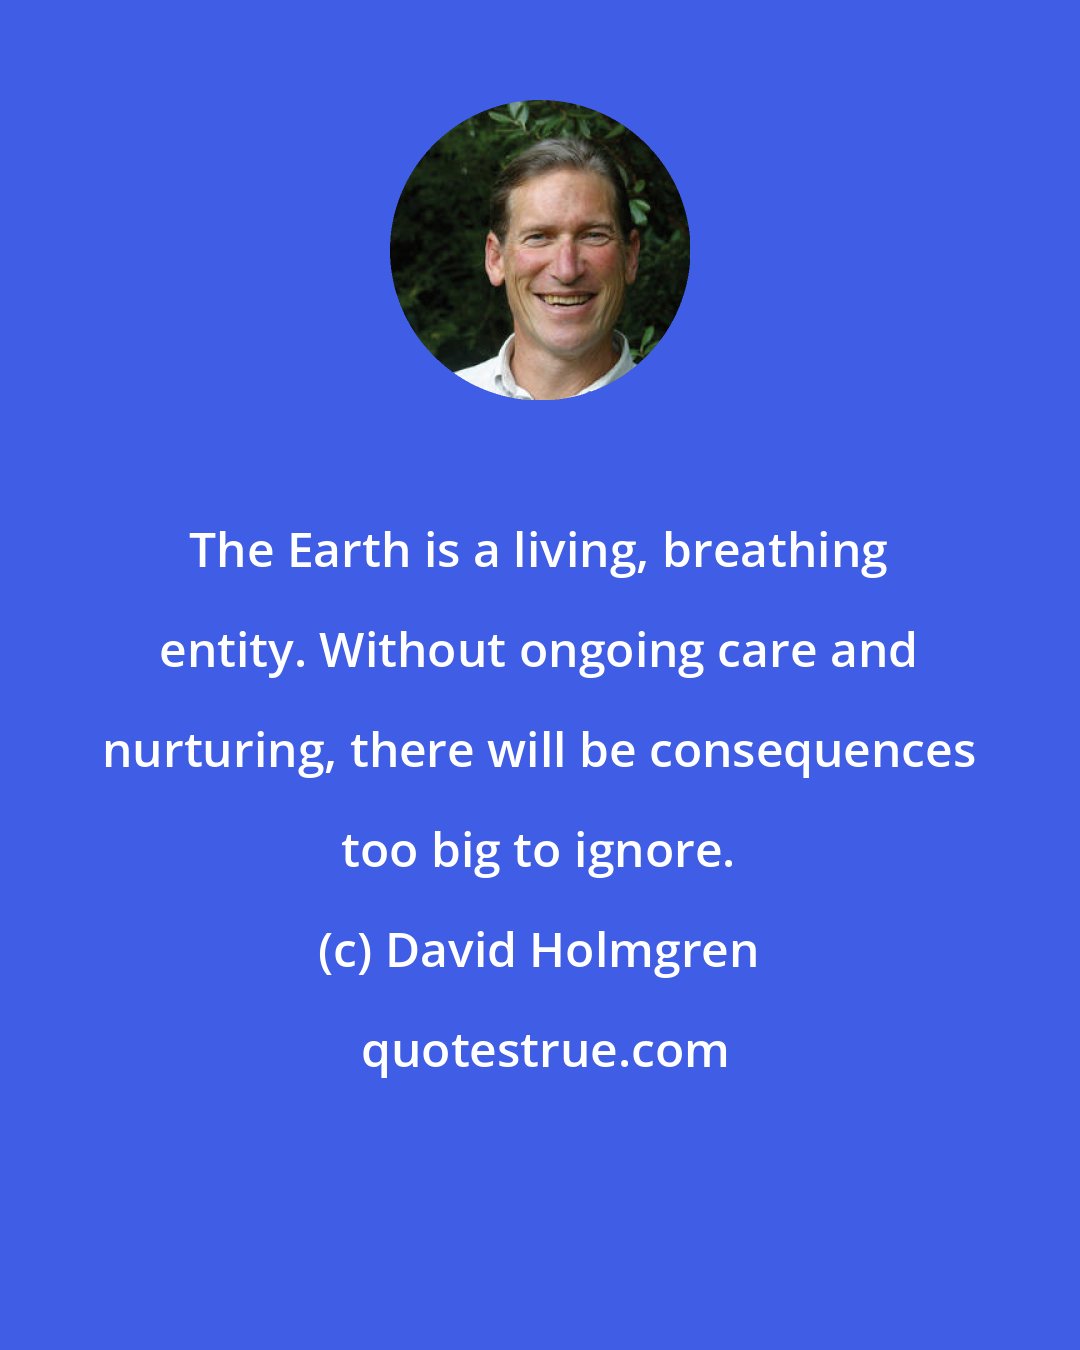 David Holmgren: The Earth is a living, breathing entity. Without ongoing care and nurturing, there will be consequences too big to ignore.